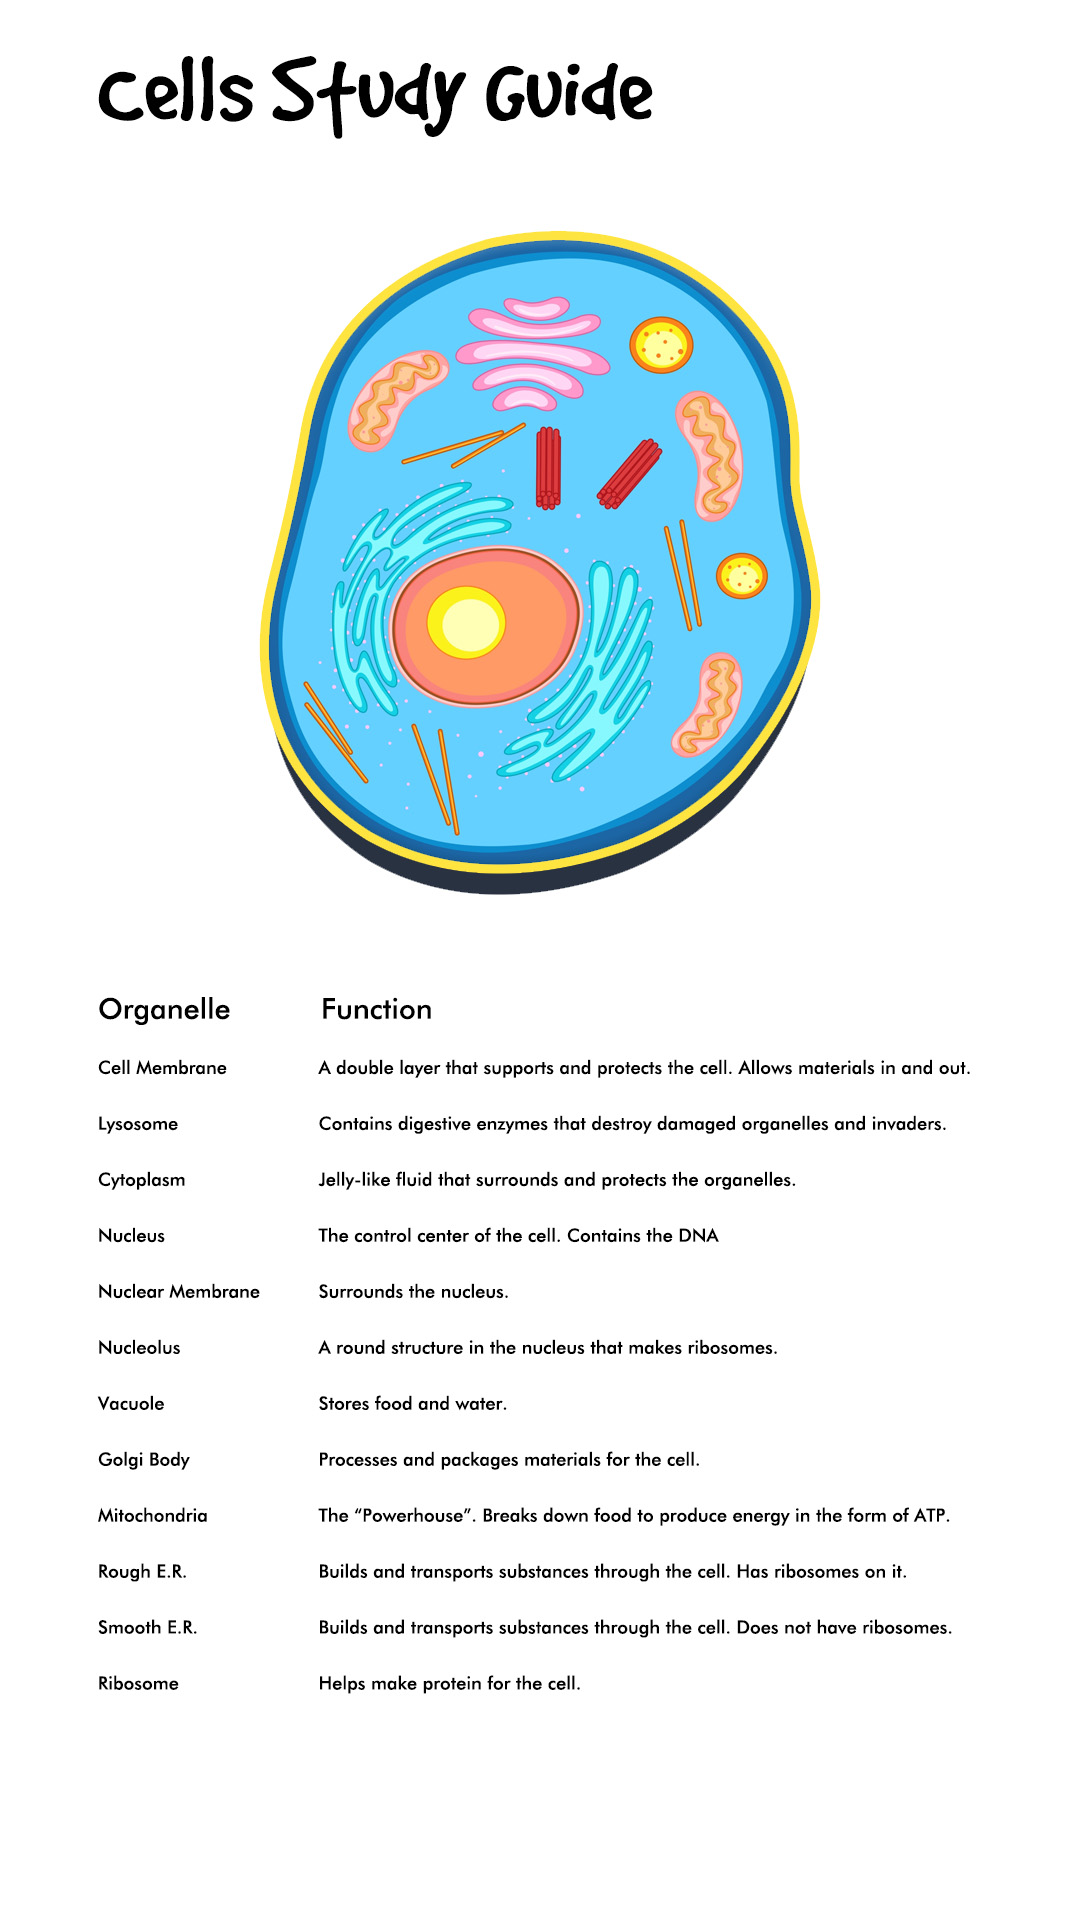 Plant and Animal Cell Study Guide